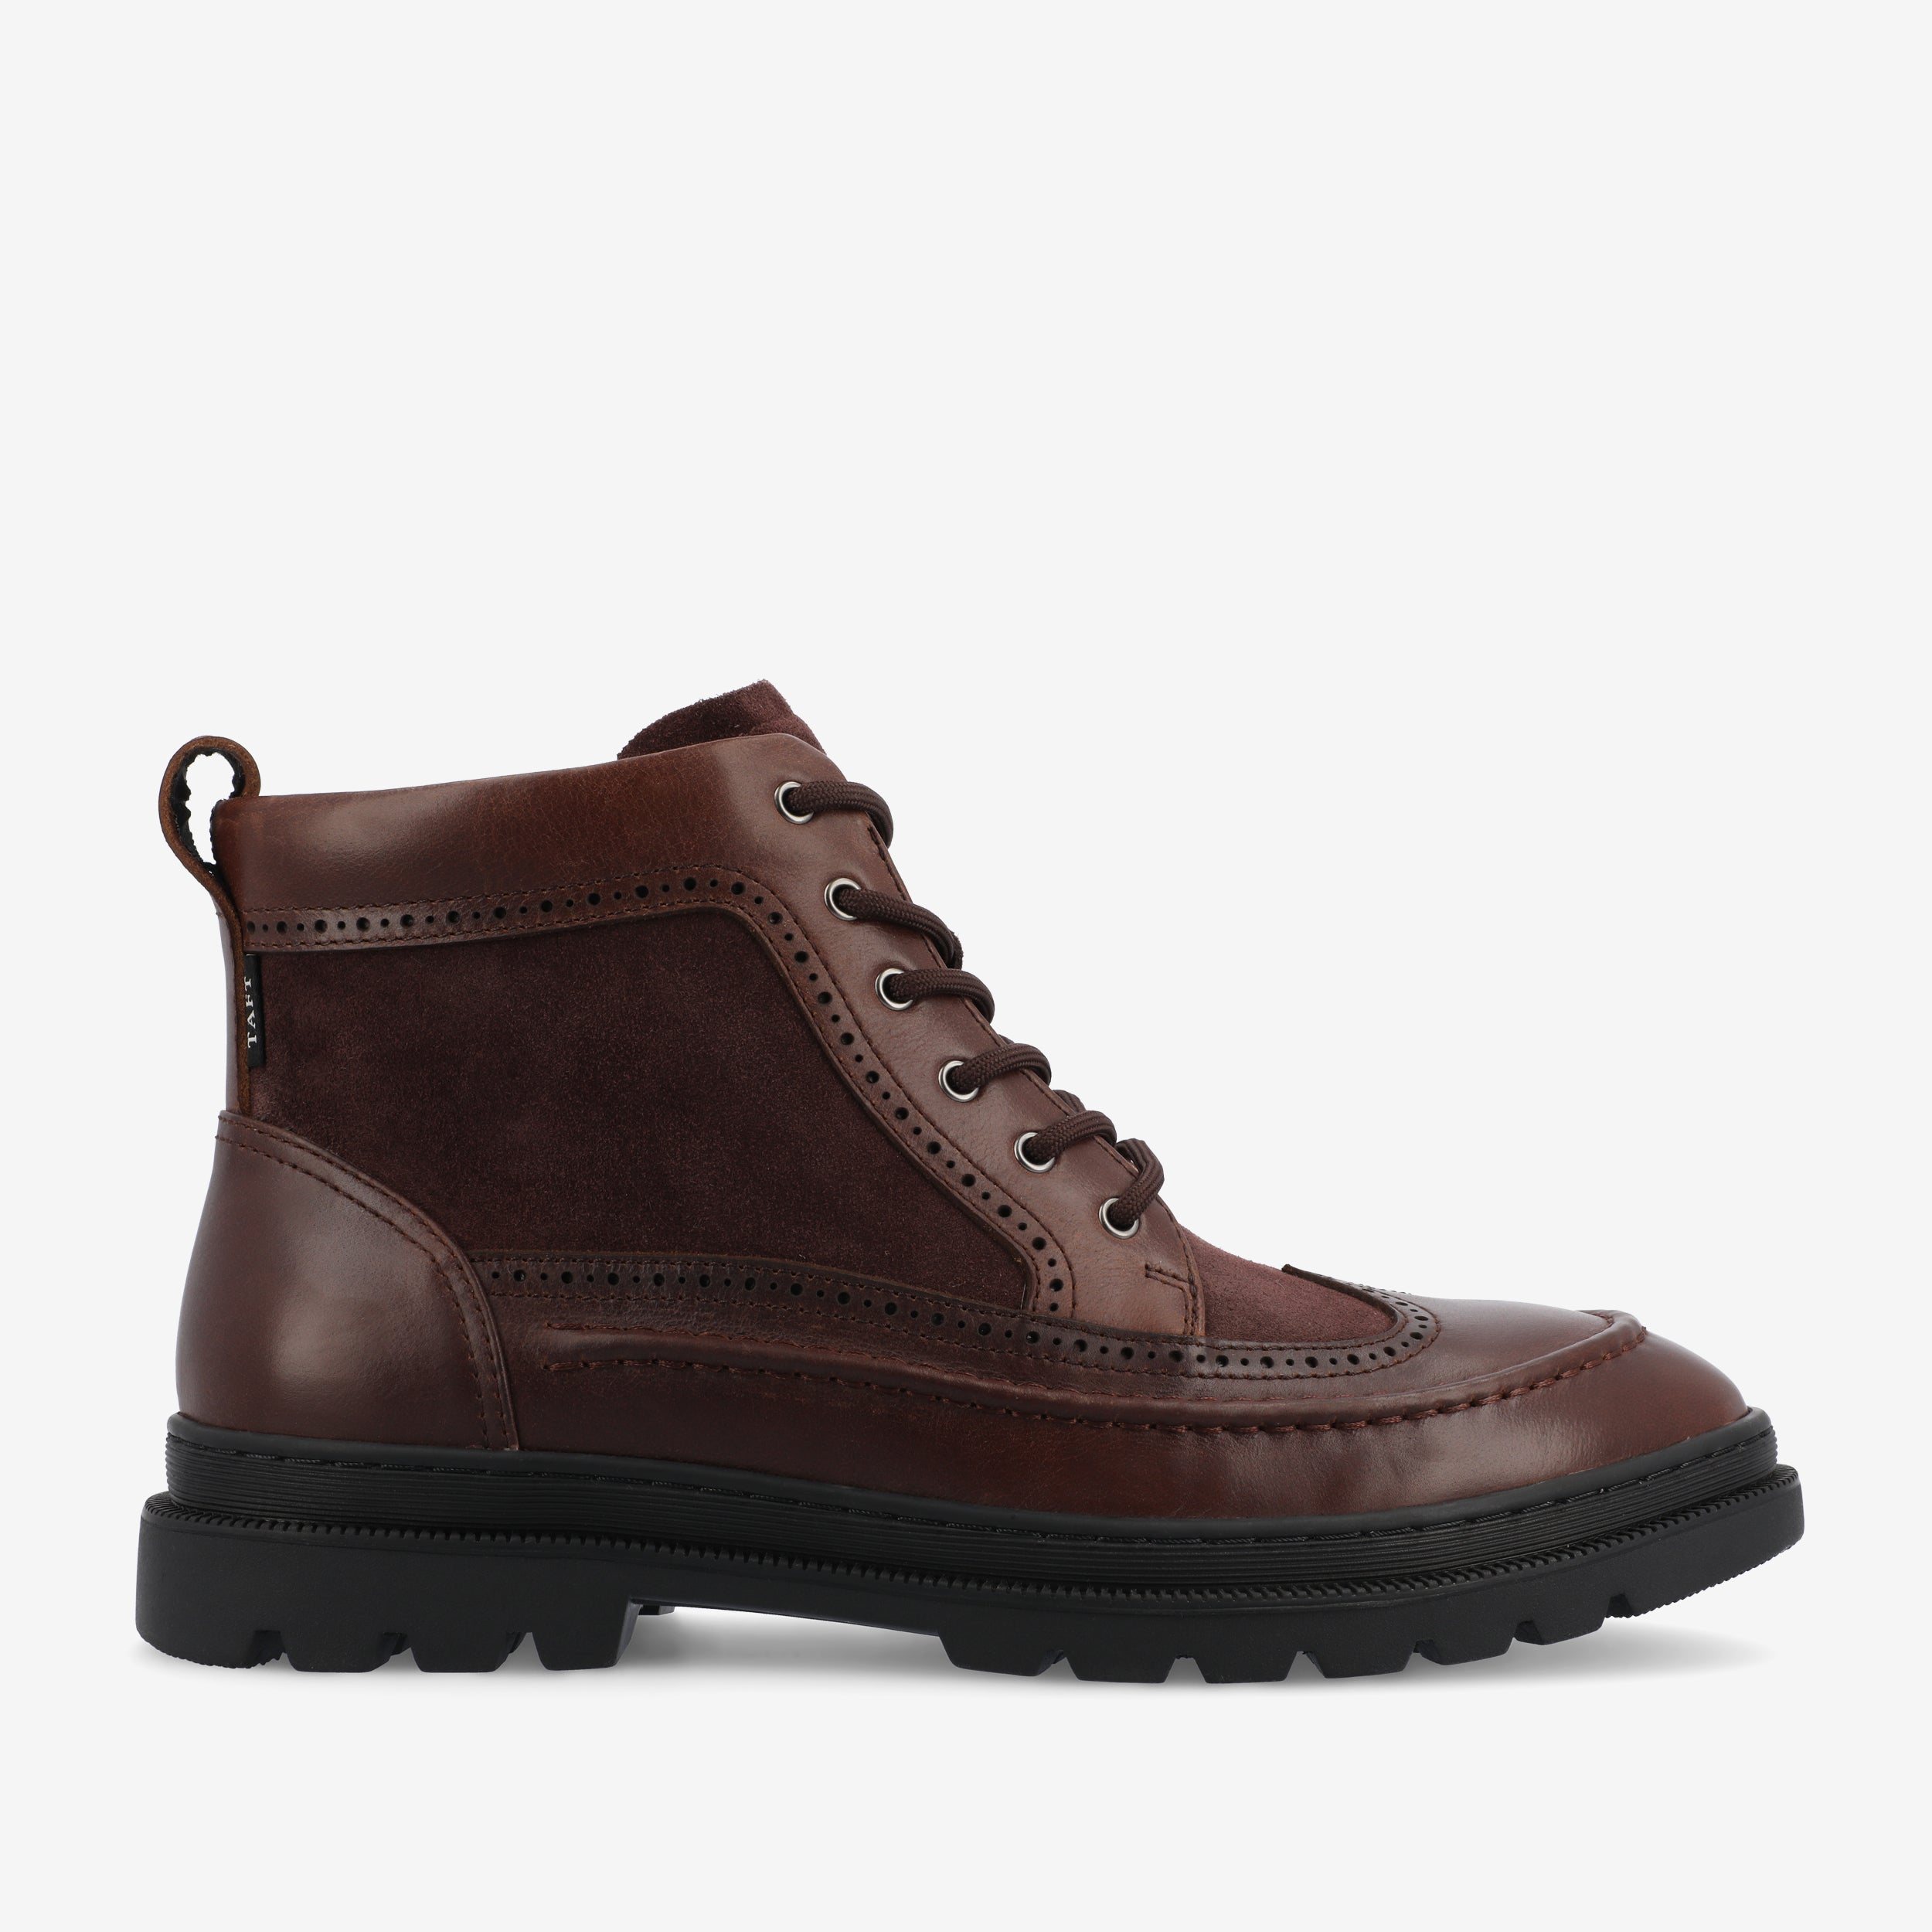 Model 008 Boot In Chocolate (Final Sale)